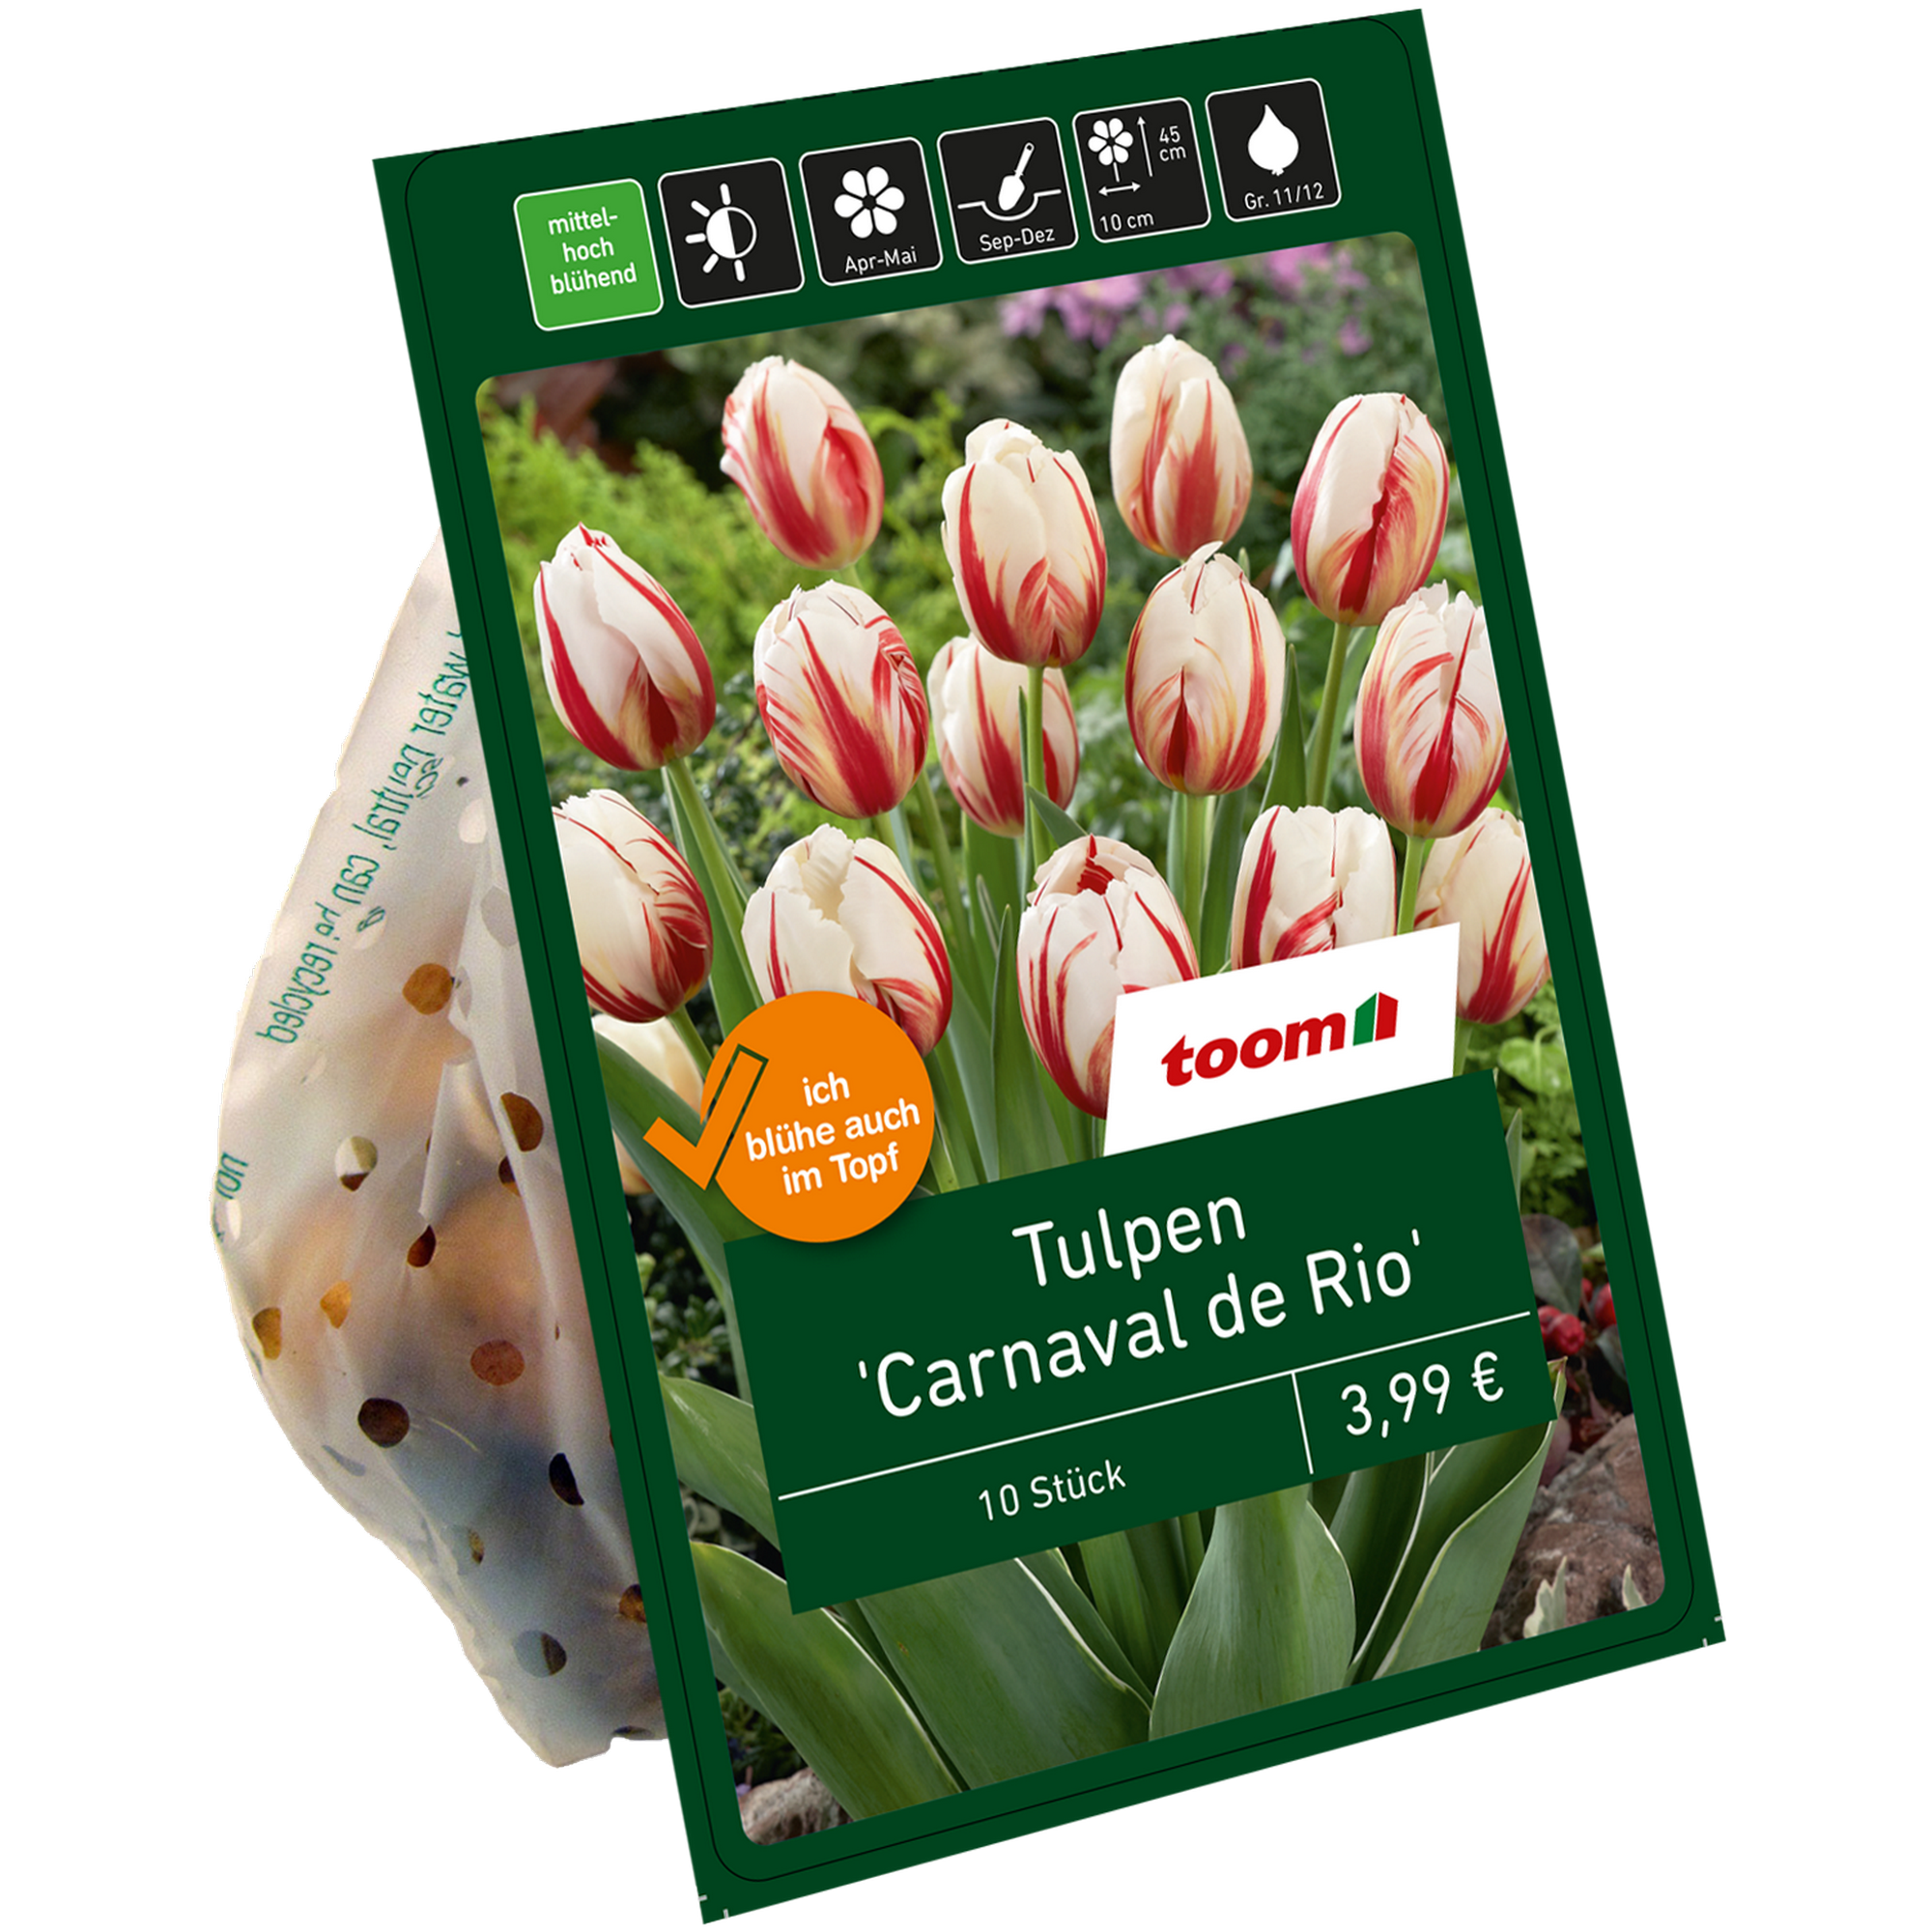 Tulpe 'Carnaval de Rio' weiß/rot 10 Zwiebeln + product picture